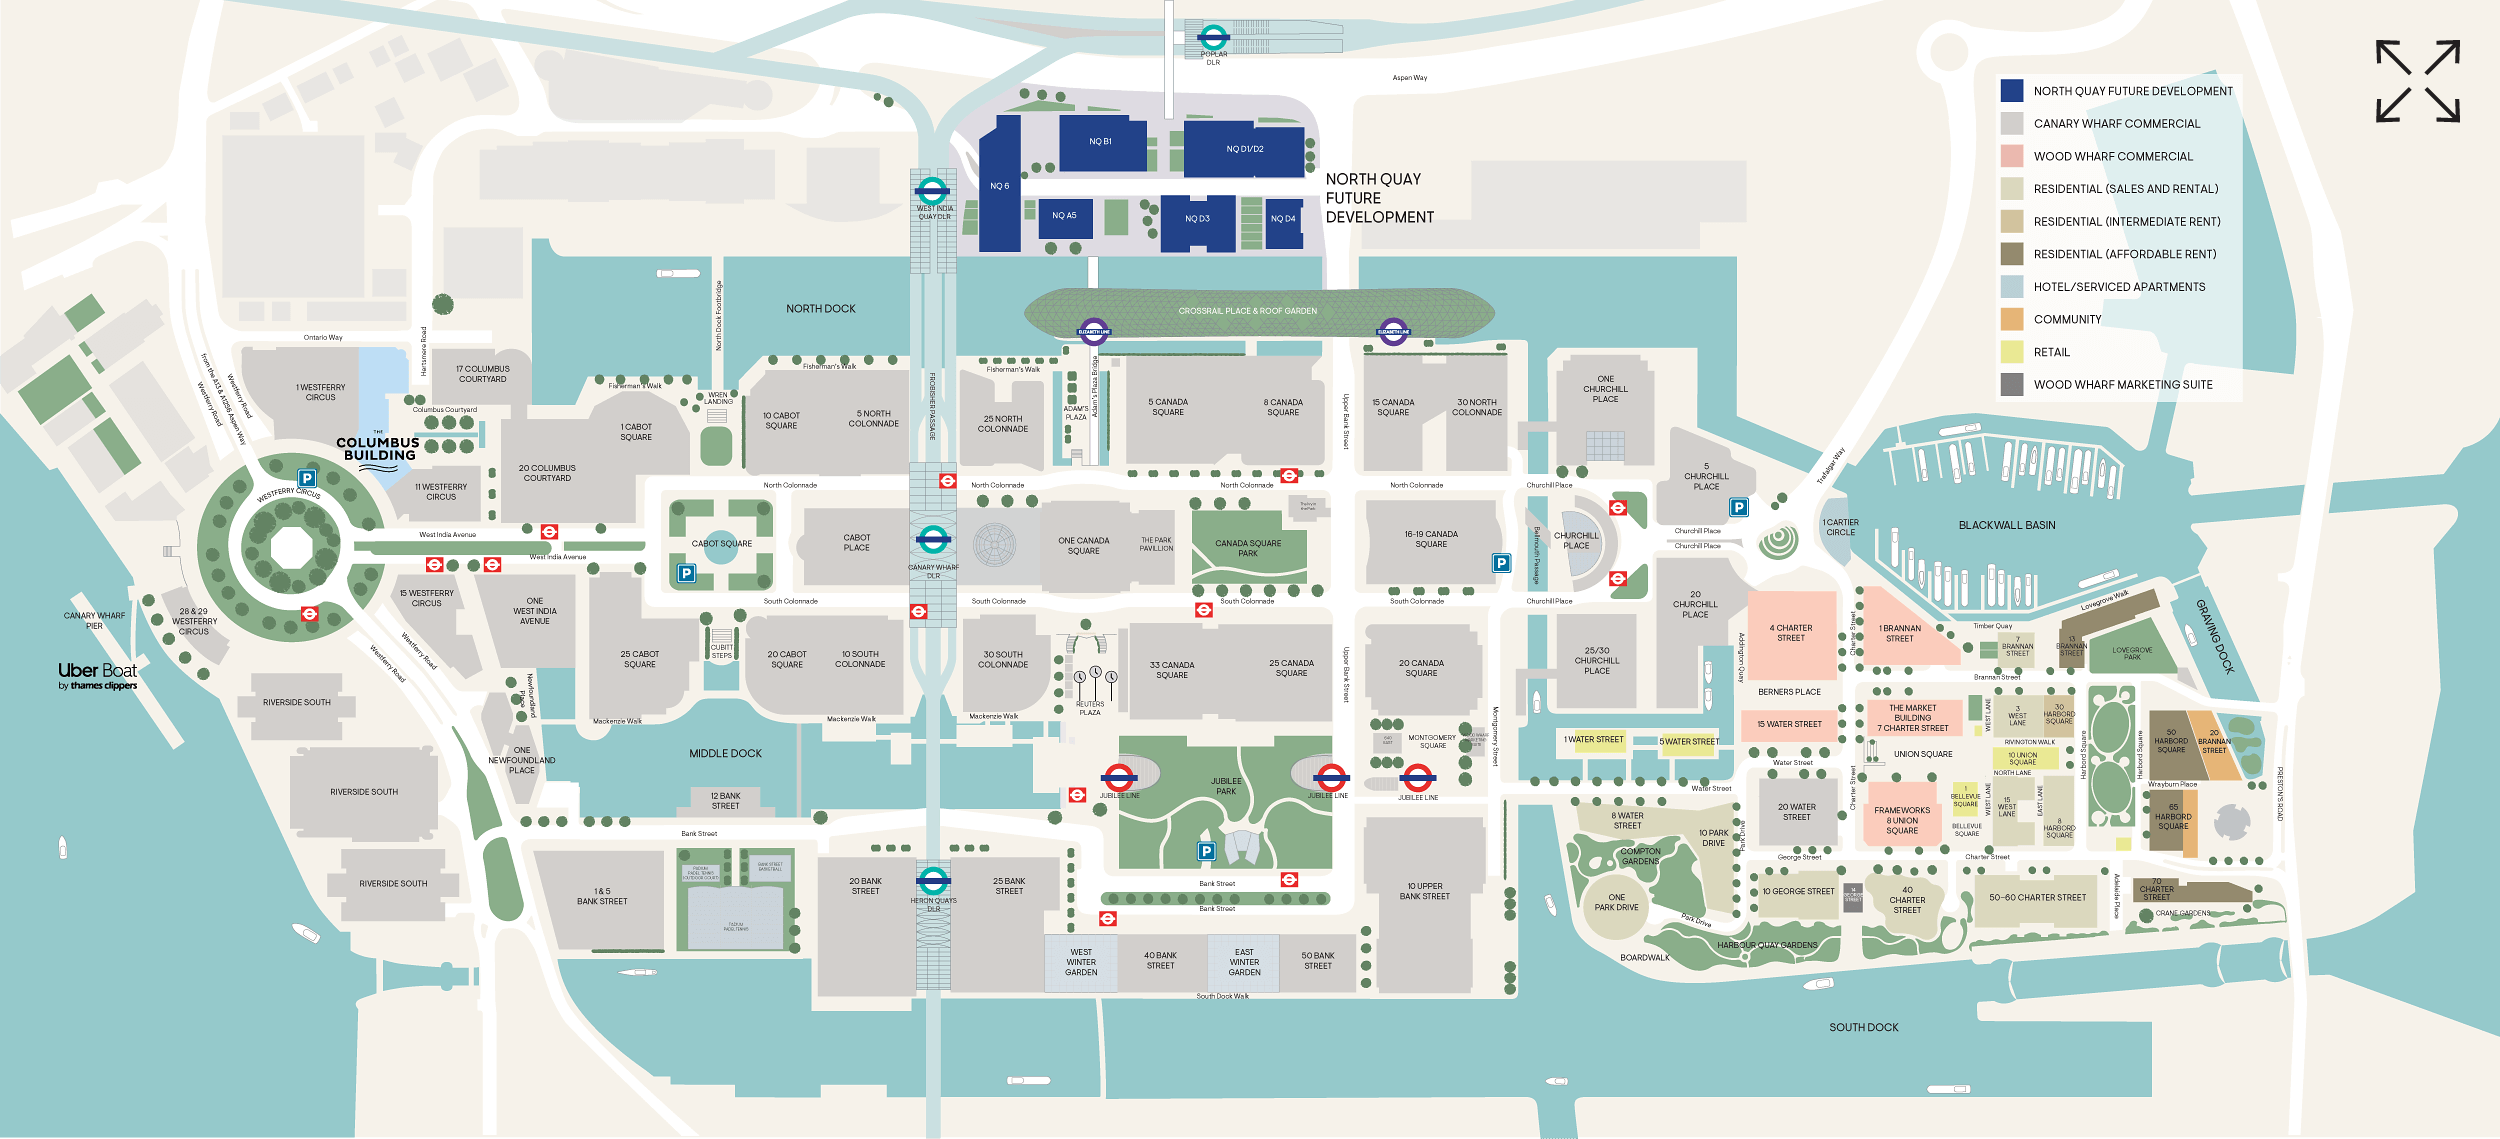 The Columbus Building map